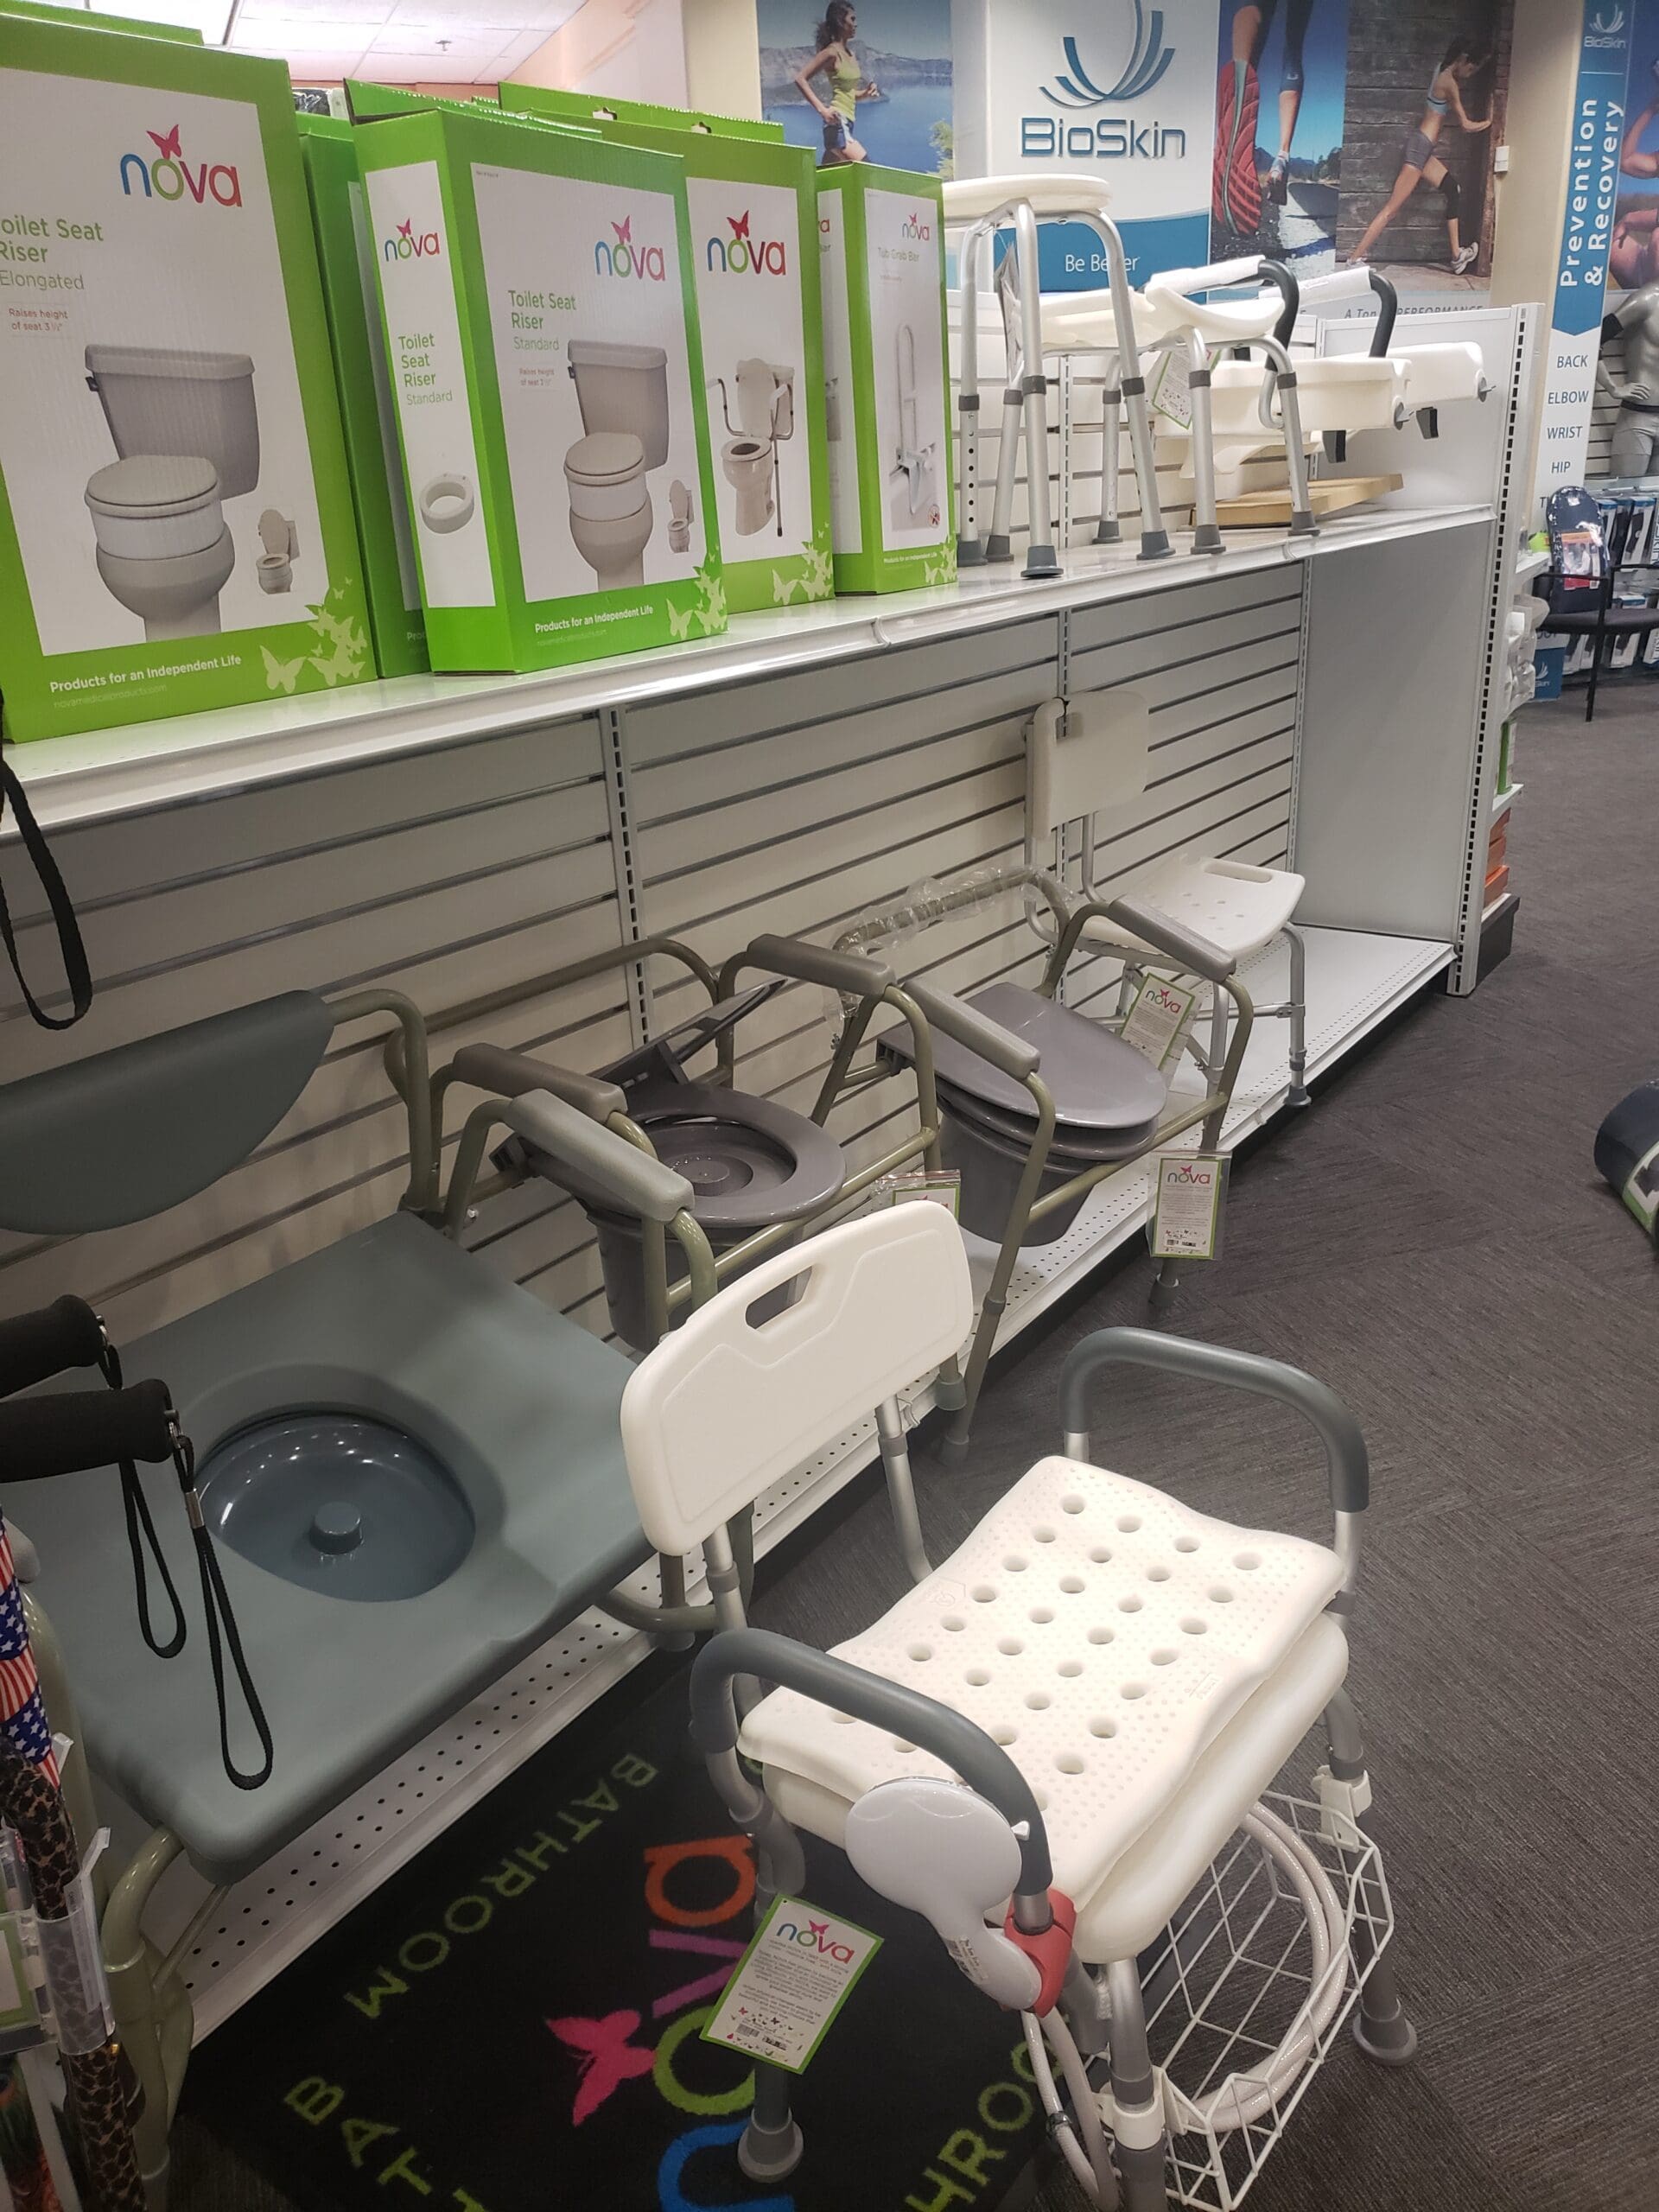 Toilet Seat Risers and Bath Chairs